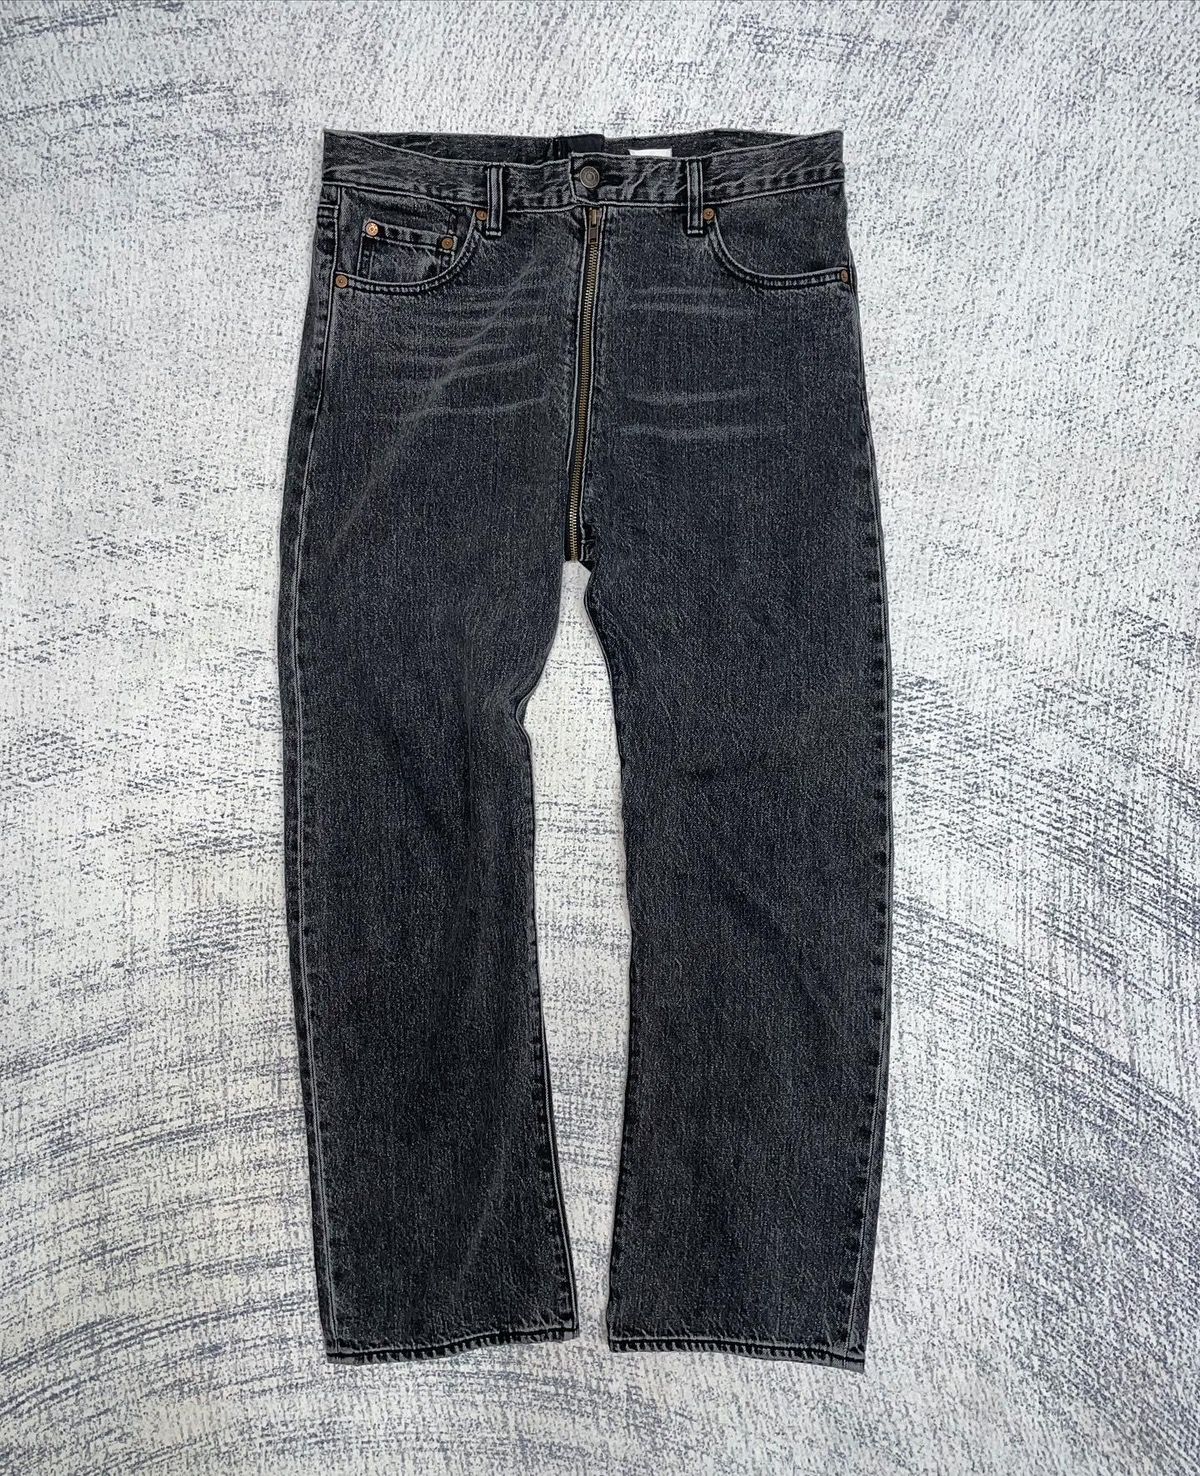 Pre-owned Vetements Ss17 Crotch Zip Denim In Washed Black